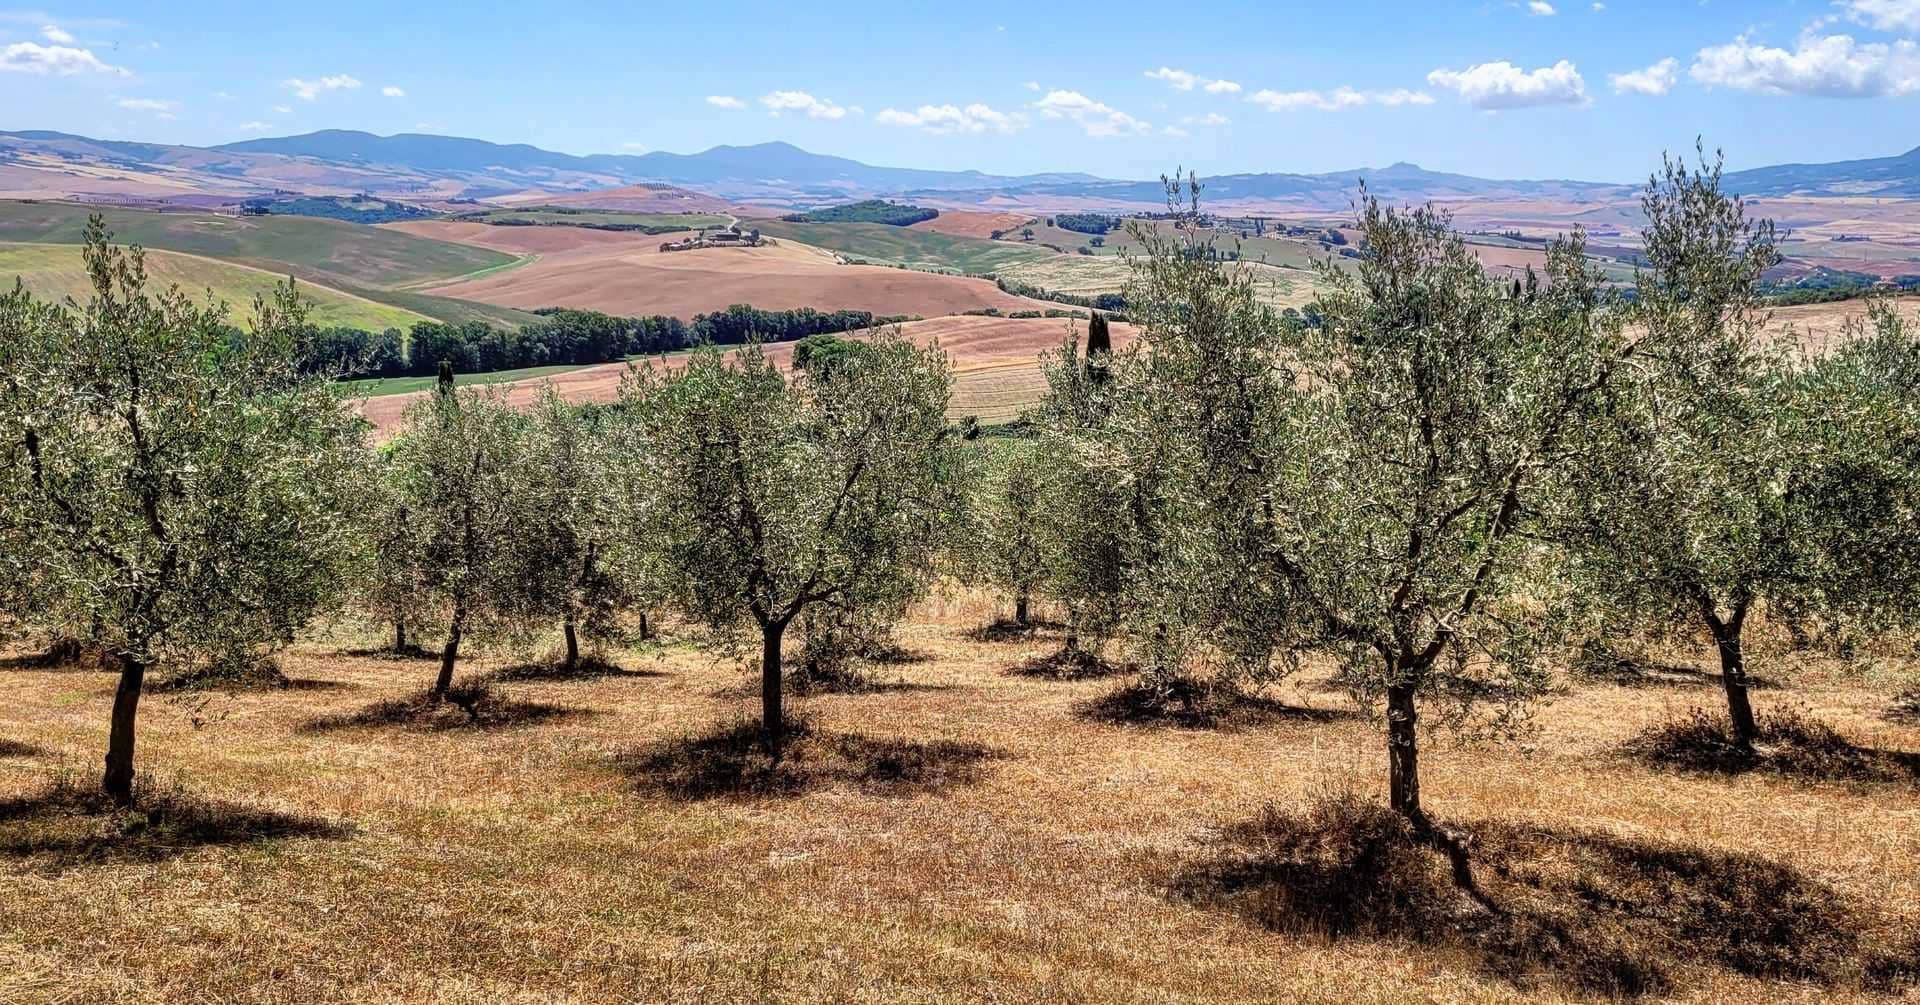 business-europe-production-in-tuscany-farmers-cope-with-climate-challenges-while-striving-for-top-quality-olive-oil-times